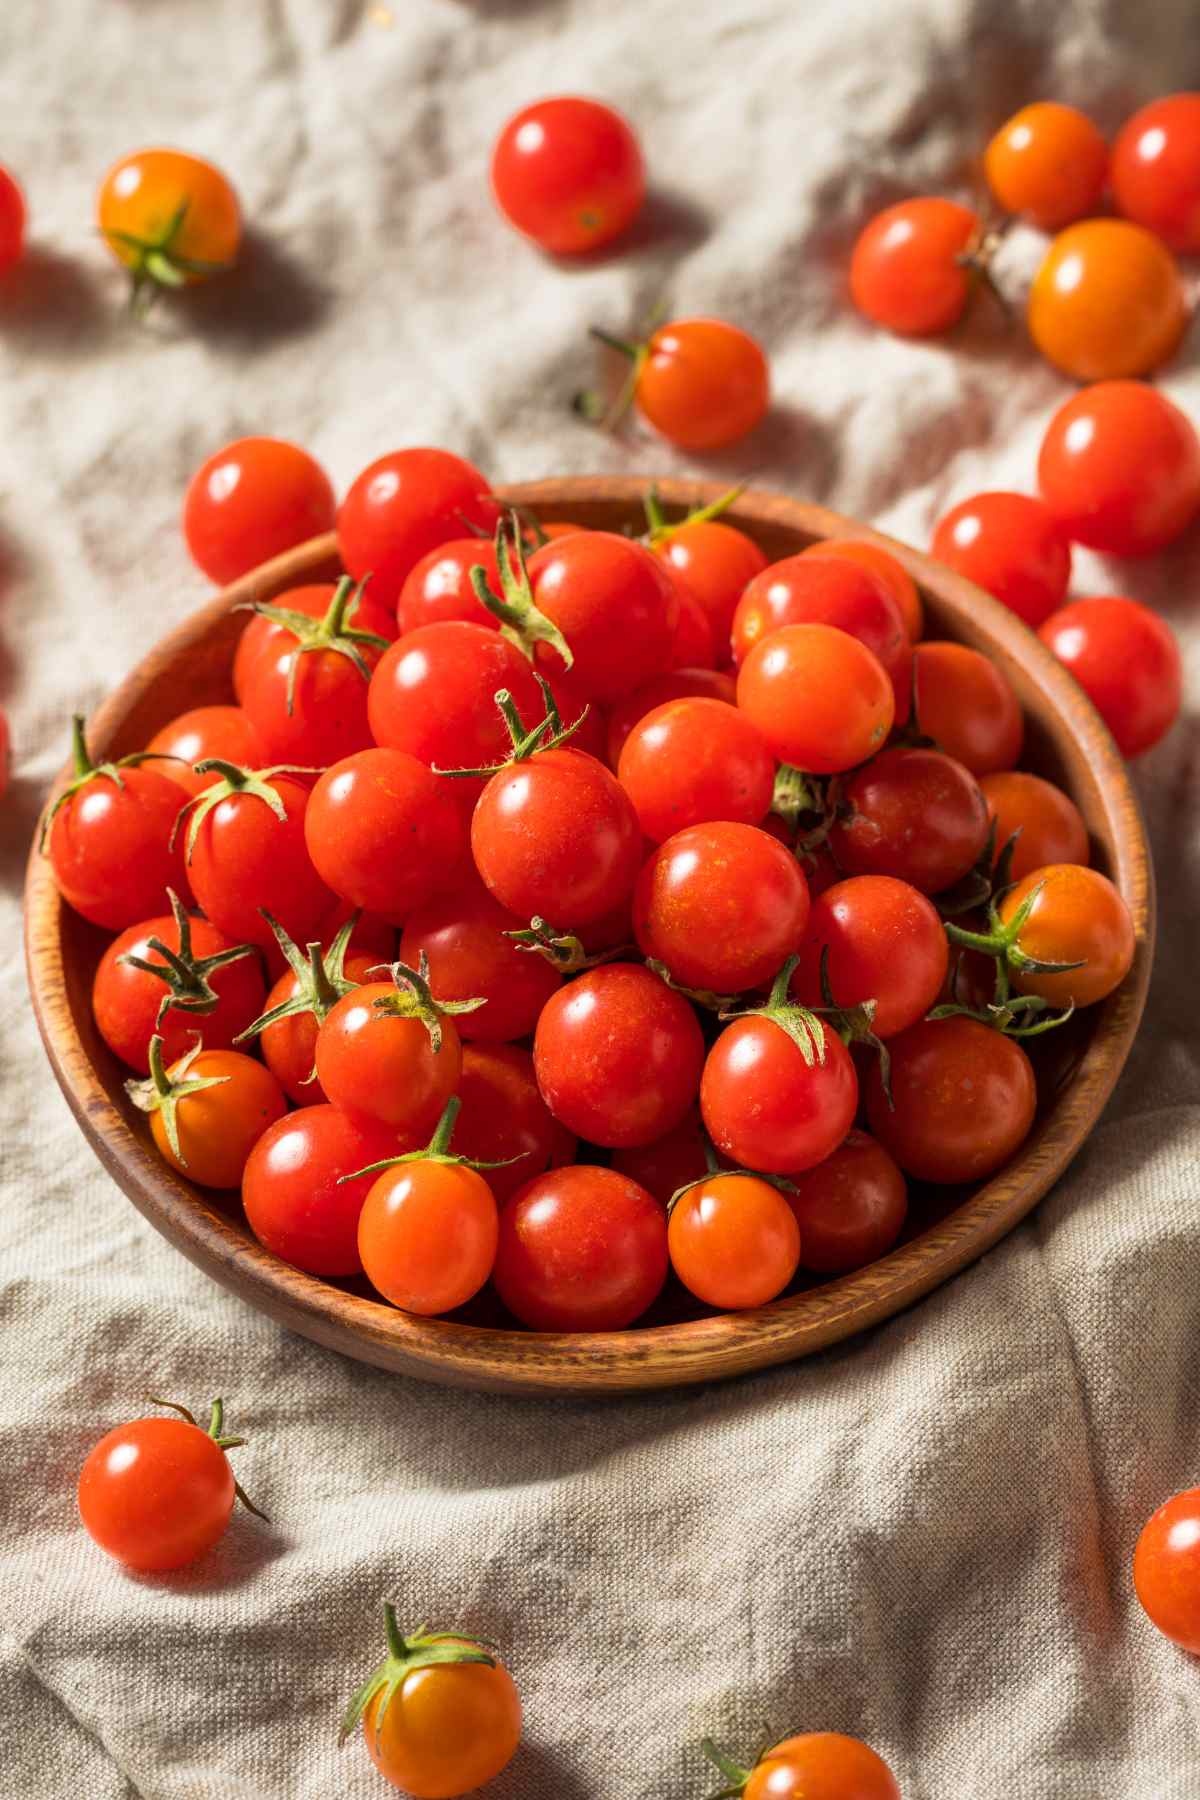 The ketogenic diet is a high-fat, low-carb diet that has gained popularity in recent years due to its potential health benefits. If you're following a keto diet, you may be wondering if cherry tomatoes are keto-friendly and how many carbs they contain.